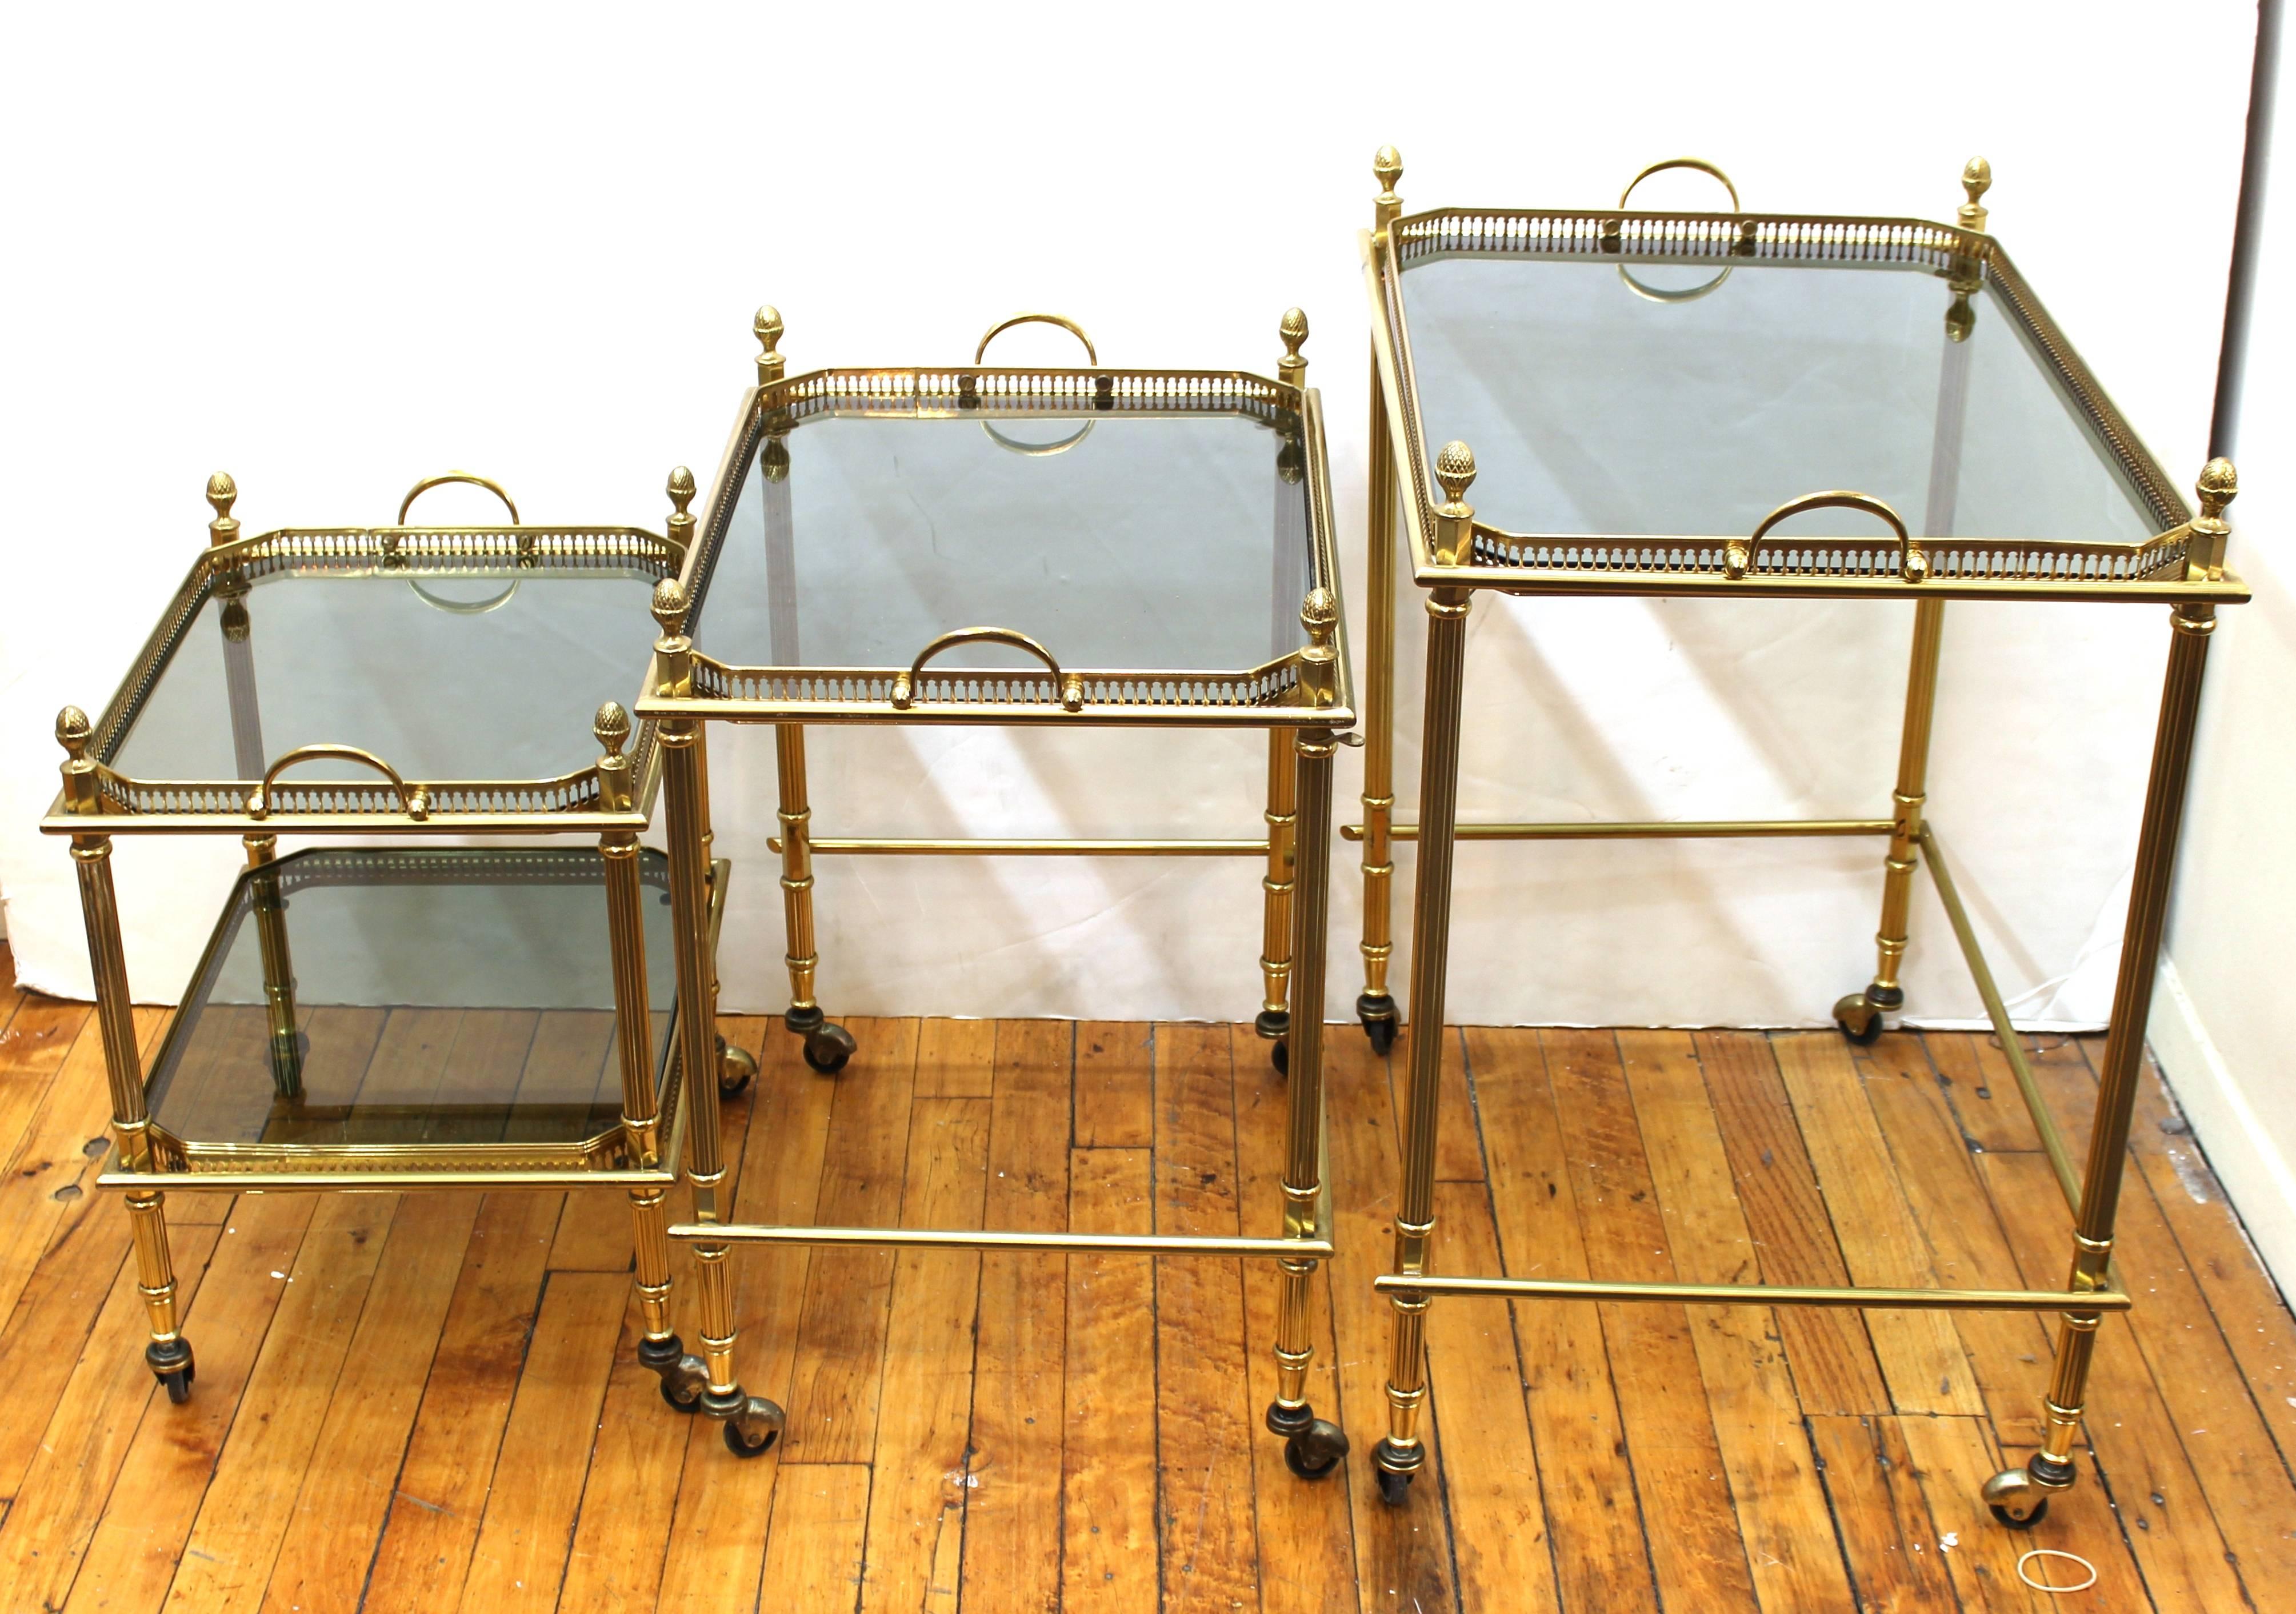 Maison Baguès Nesting Tables in Brass and Smoked Glass on Casters In Excellent Condition In New York, NY